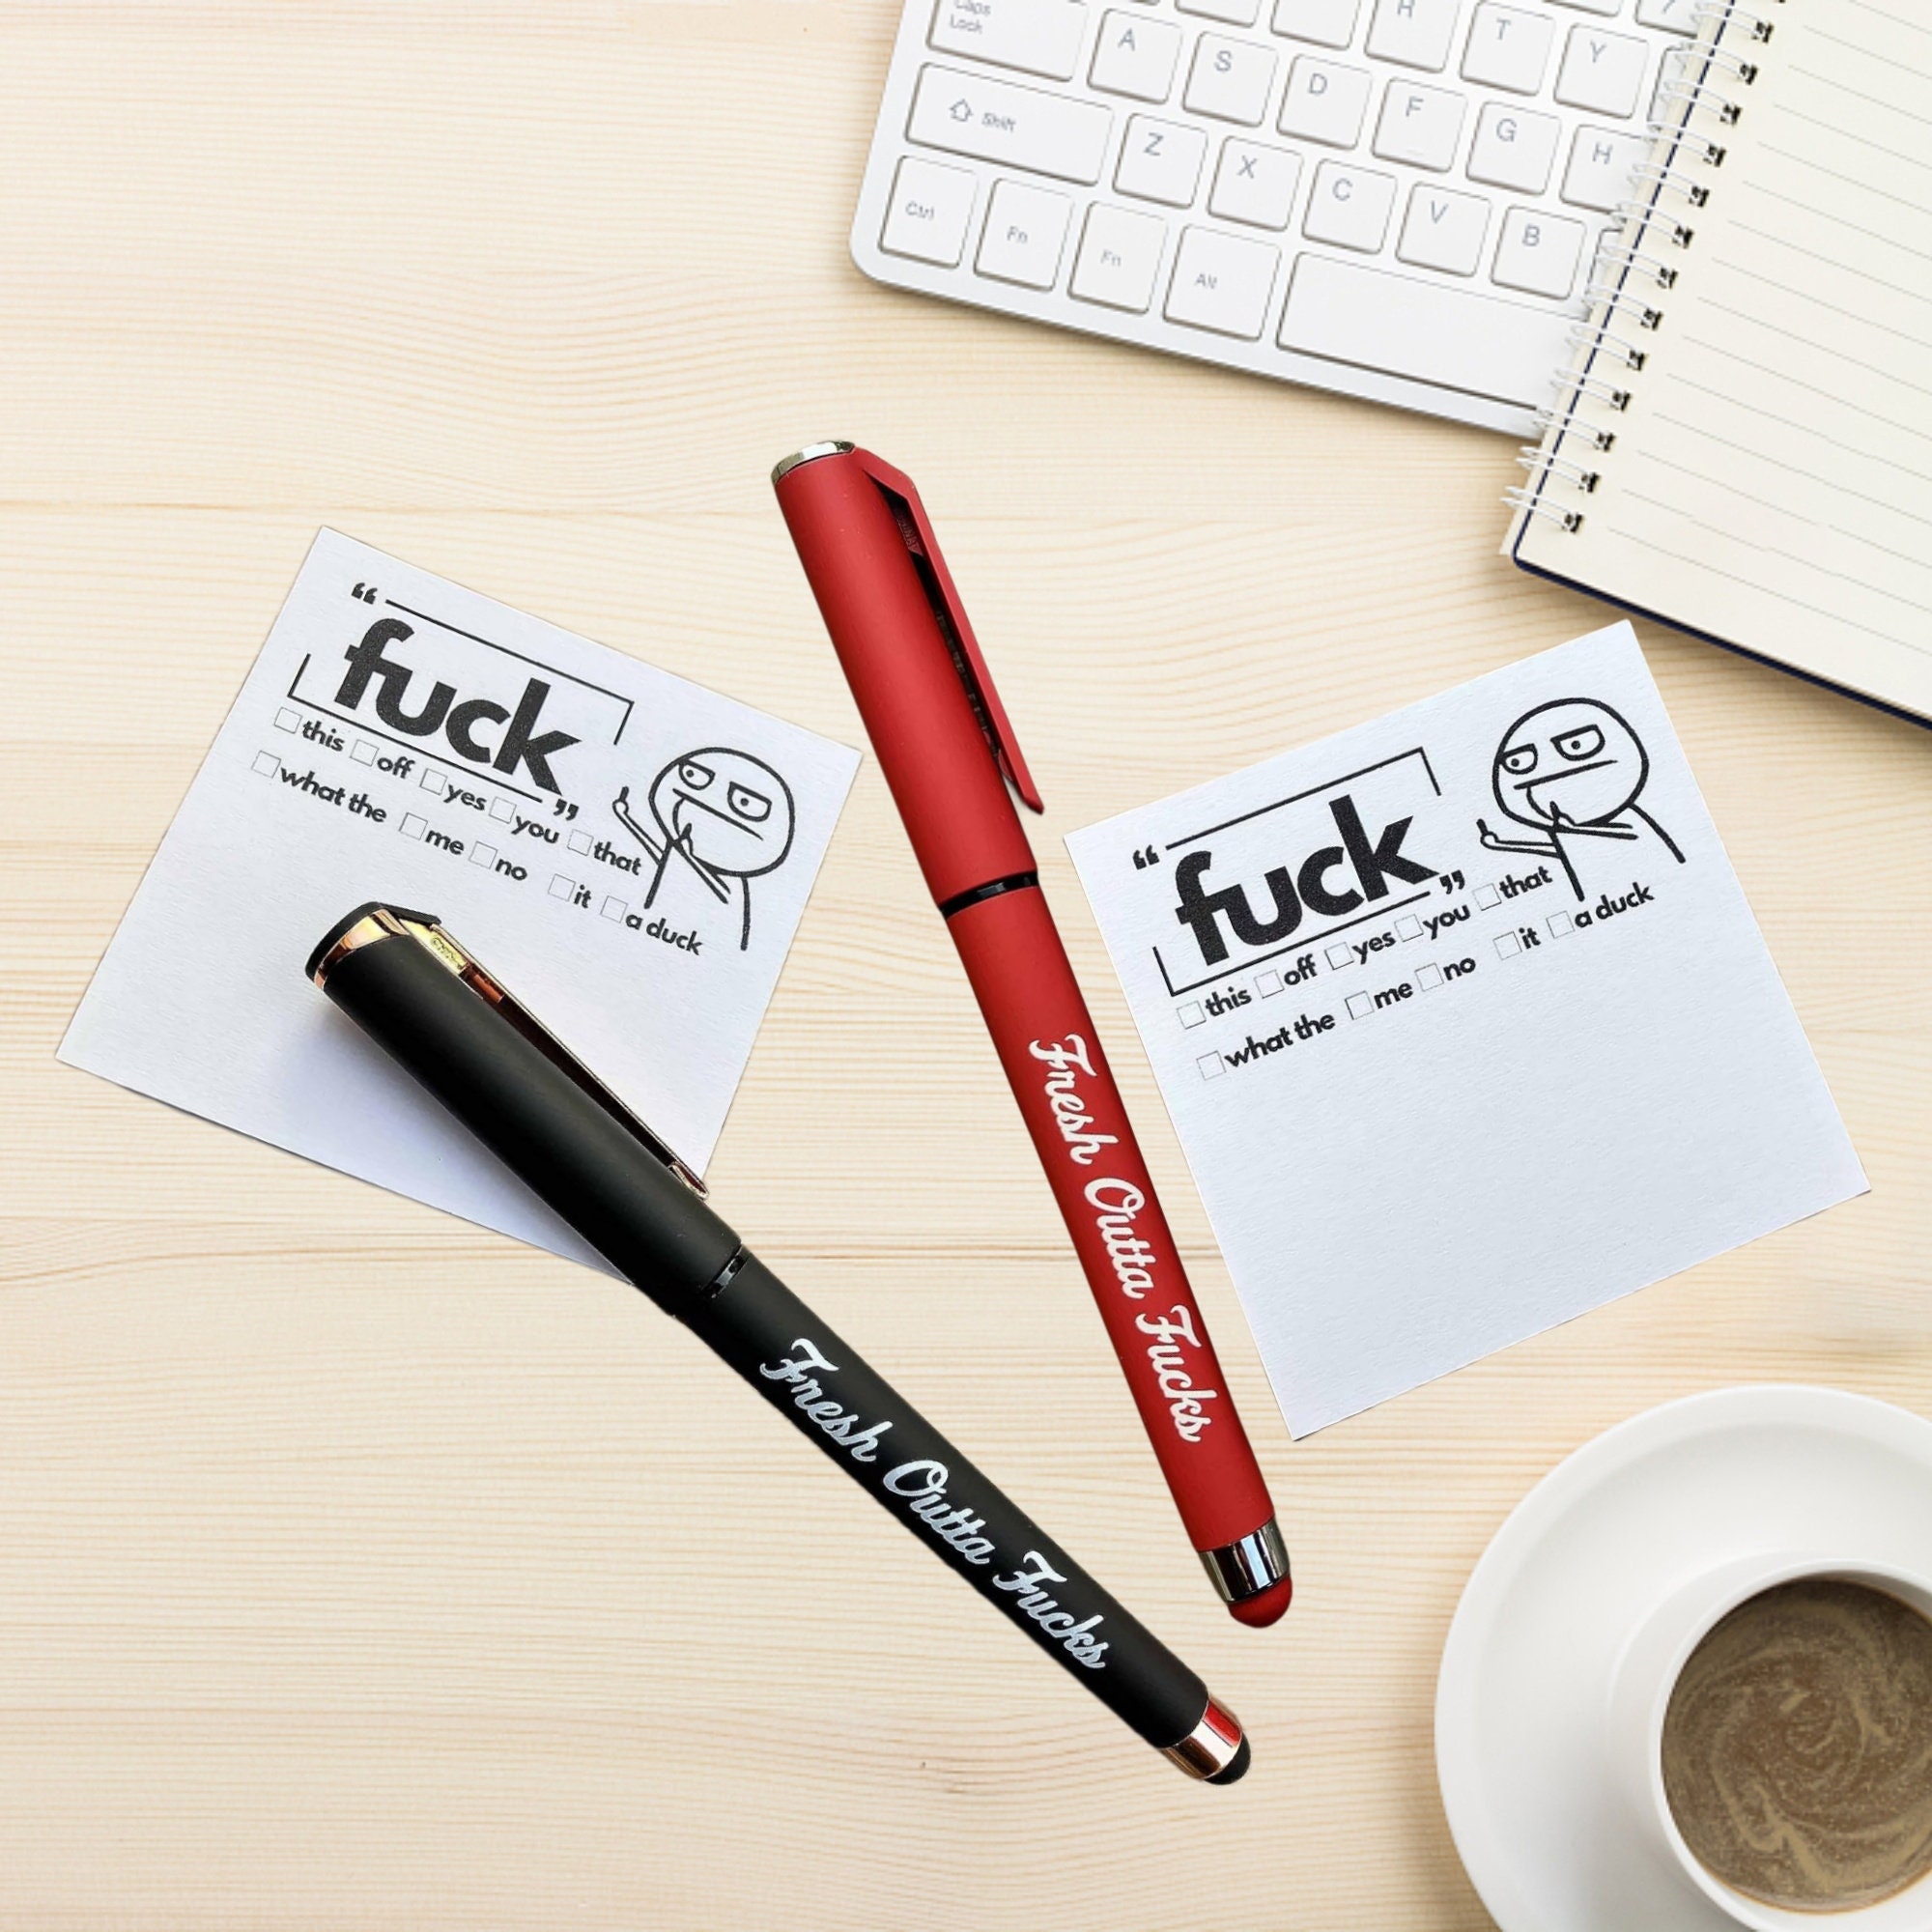 Fresh Out of Fcks Pen and Pad Set, Fresh Outta Fucks Pad and Pen, Snarky  Novelty Fresh Outta Fucks Pen Set, Funny Pad and Pen Desk Accessory Office